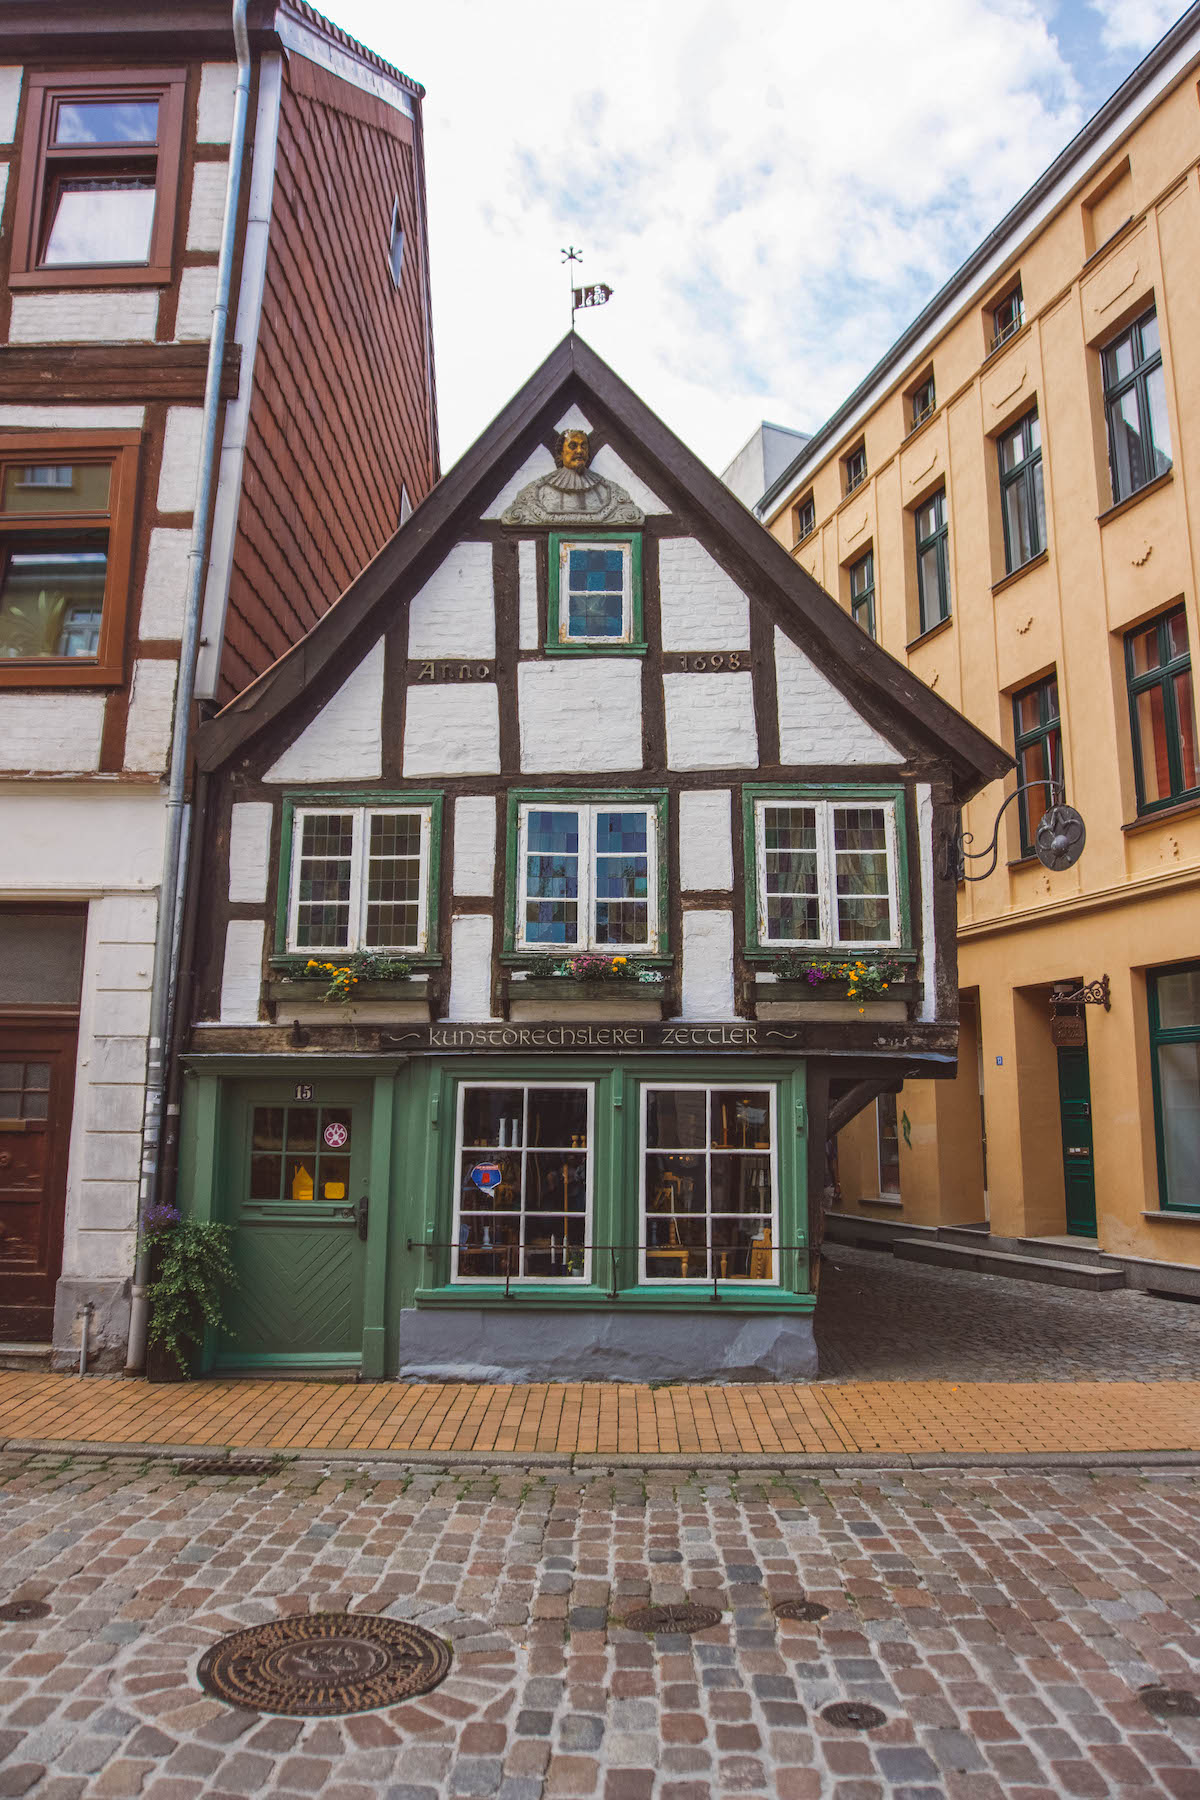 A half-timbered house in Old Town Schwerin, Germany. 